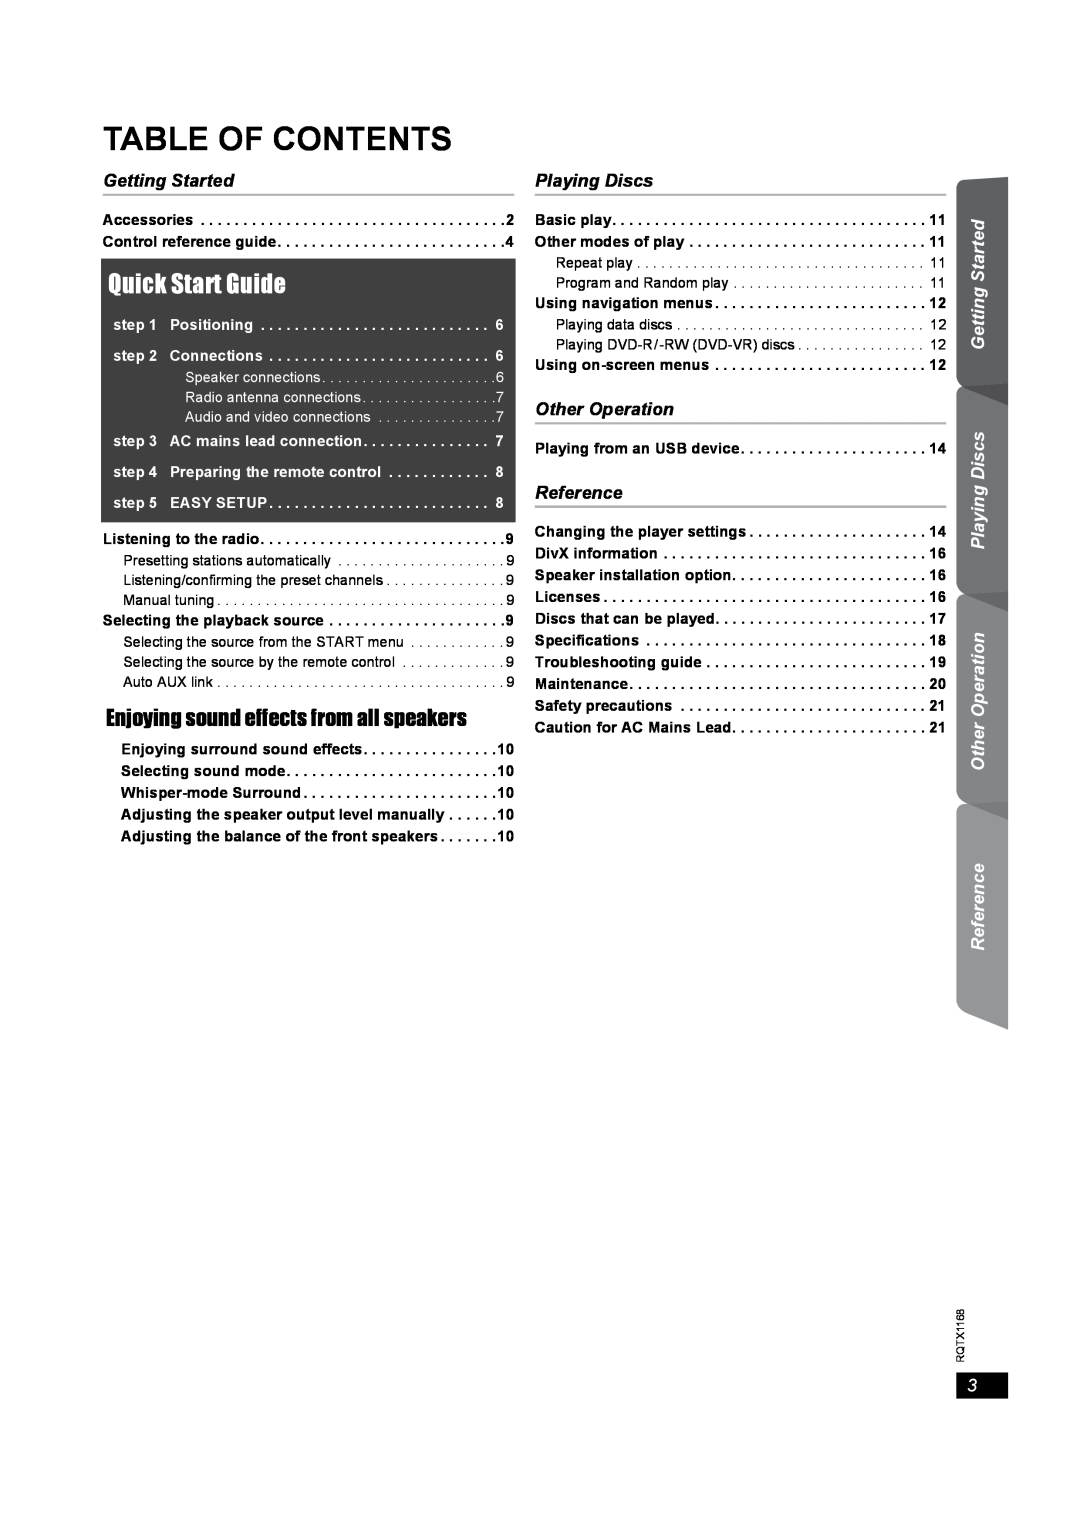 Panasonic SC-PT22 manual Table Of Contents, Getting Started Playing Discs Other Operation Reference, Quick Start Guide 